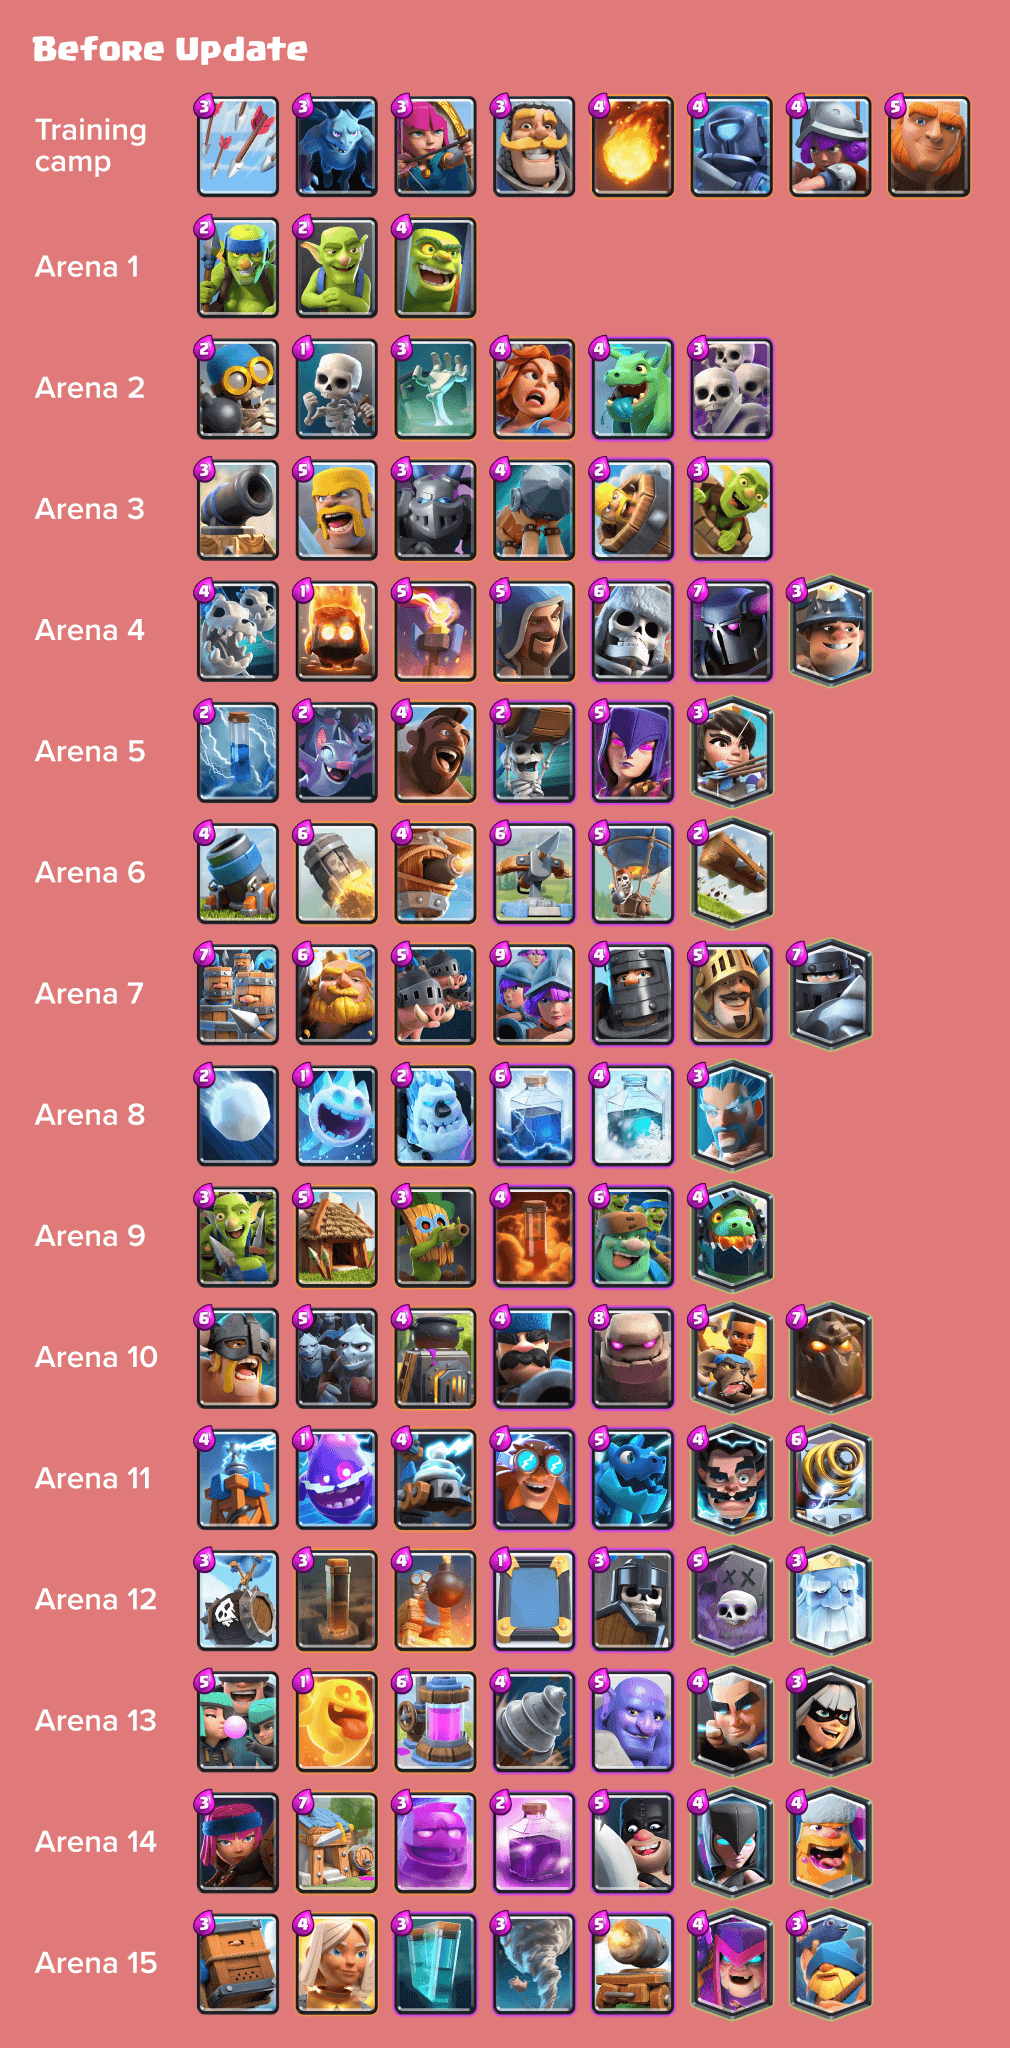 93% WIN RATE! BEST DECK TO UPGRADE WITHOUT CHAMPIONS — Clash Royale 